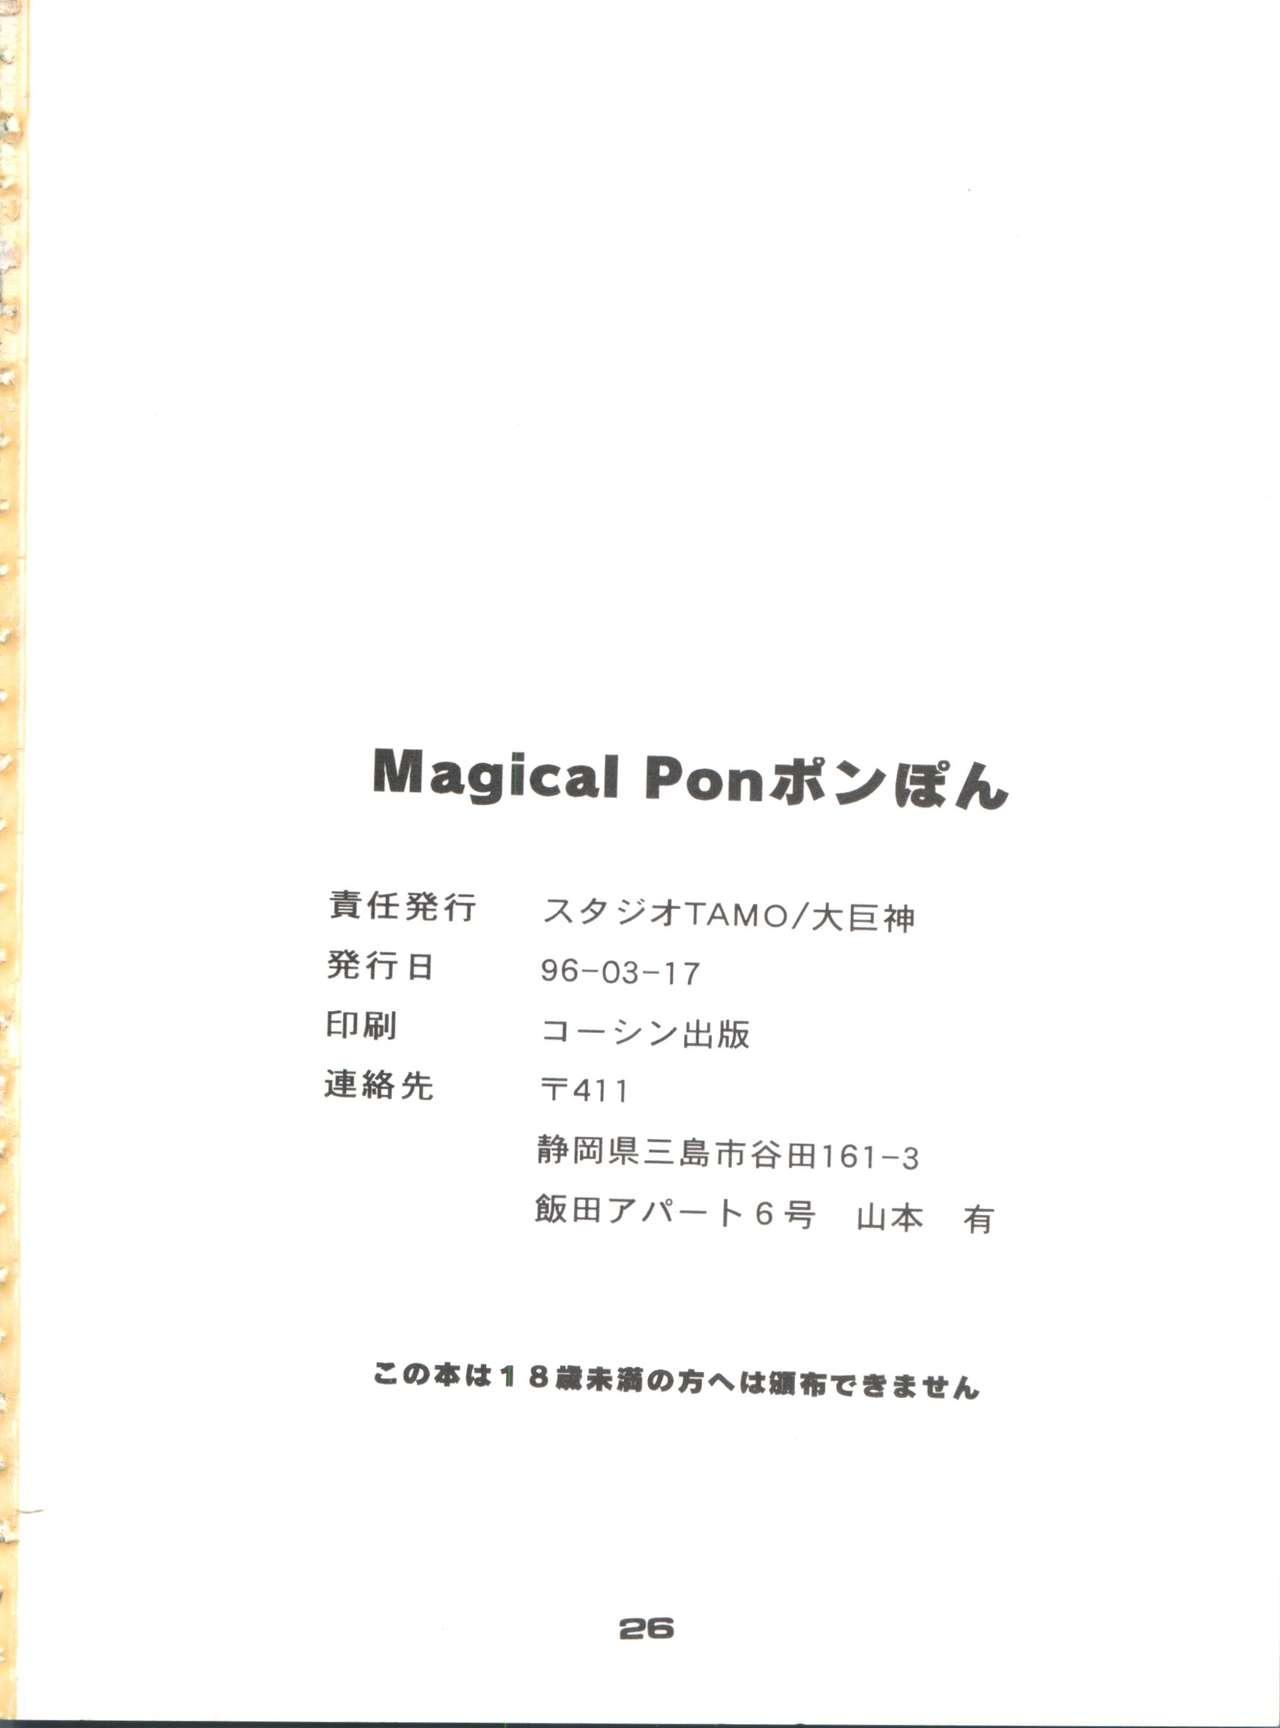 Best Blow Jobs Ever Magical Ponponpon Returns - Magical emi Leaked - Page 25